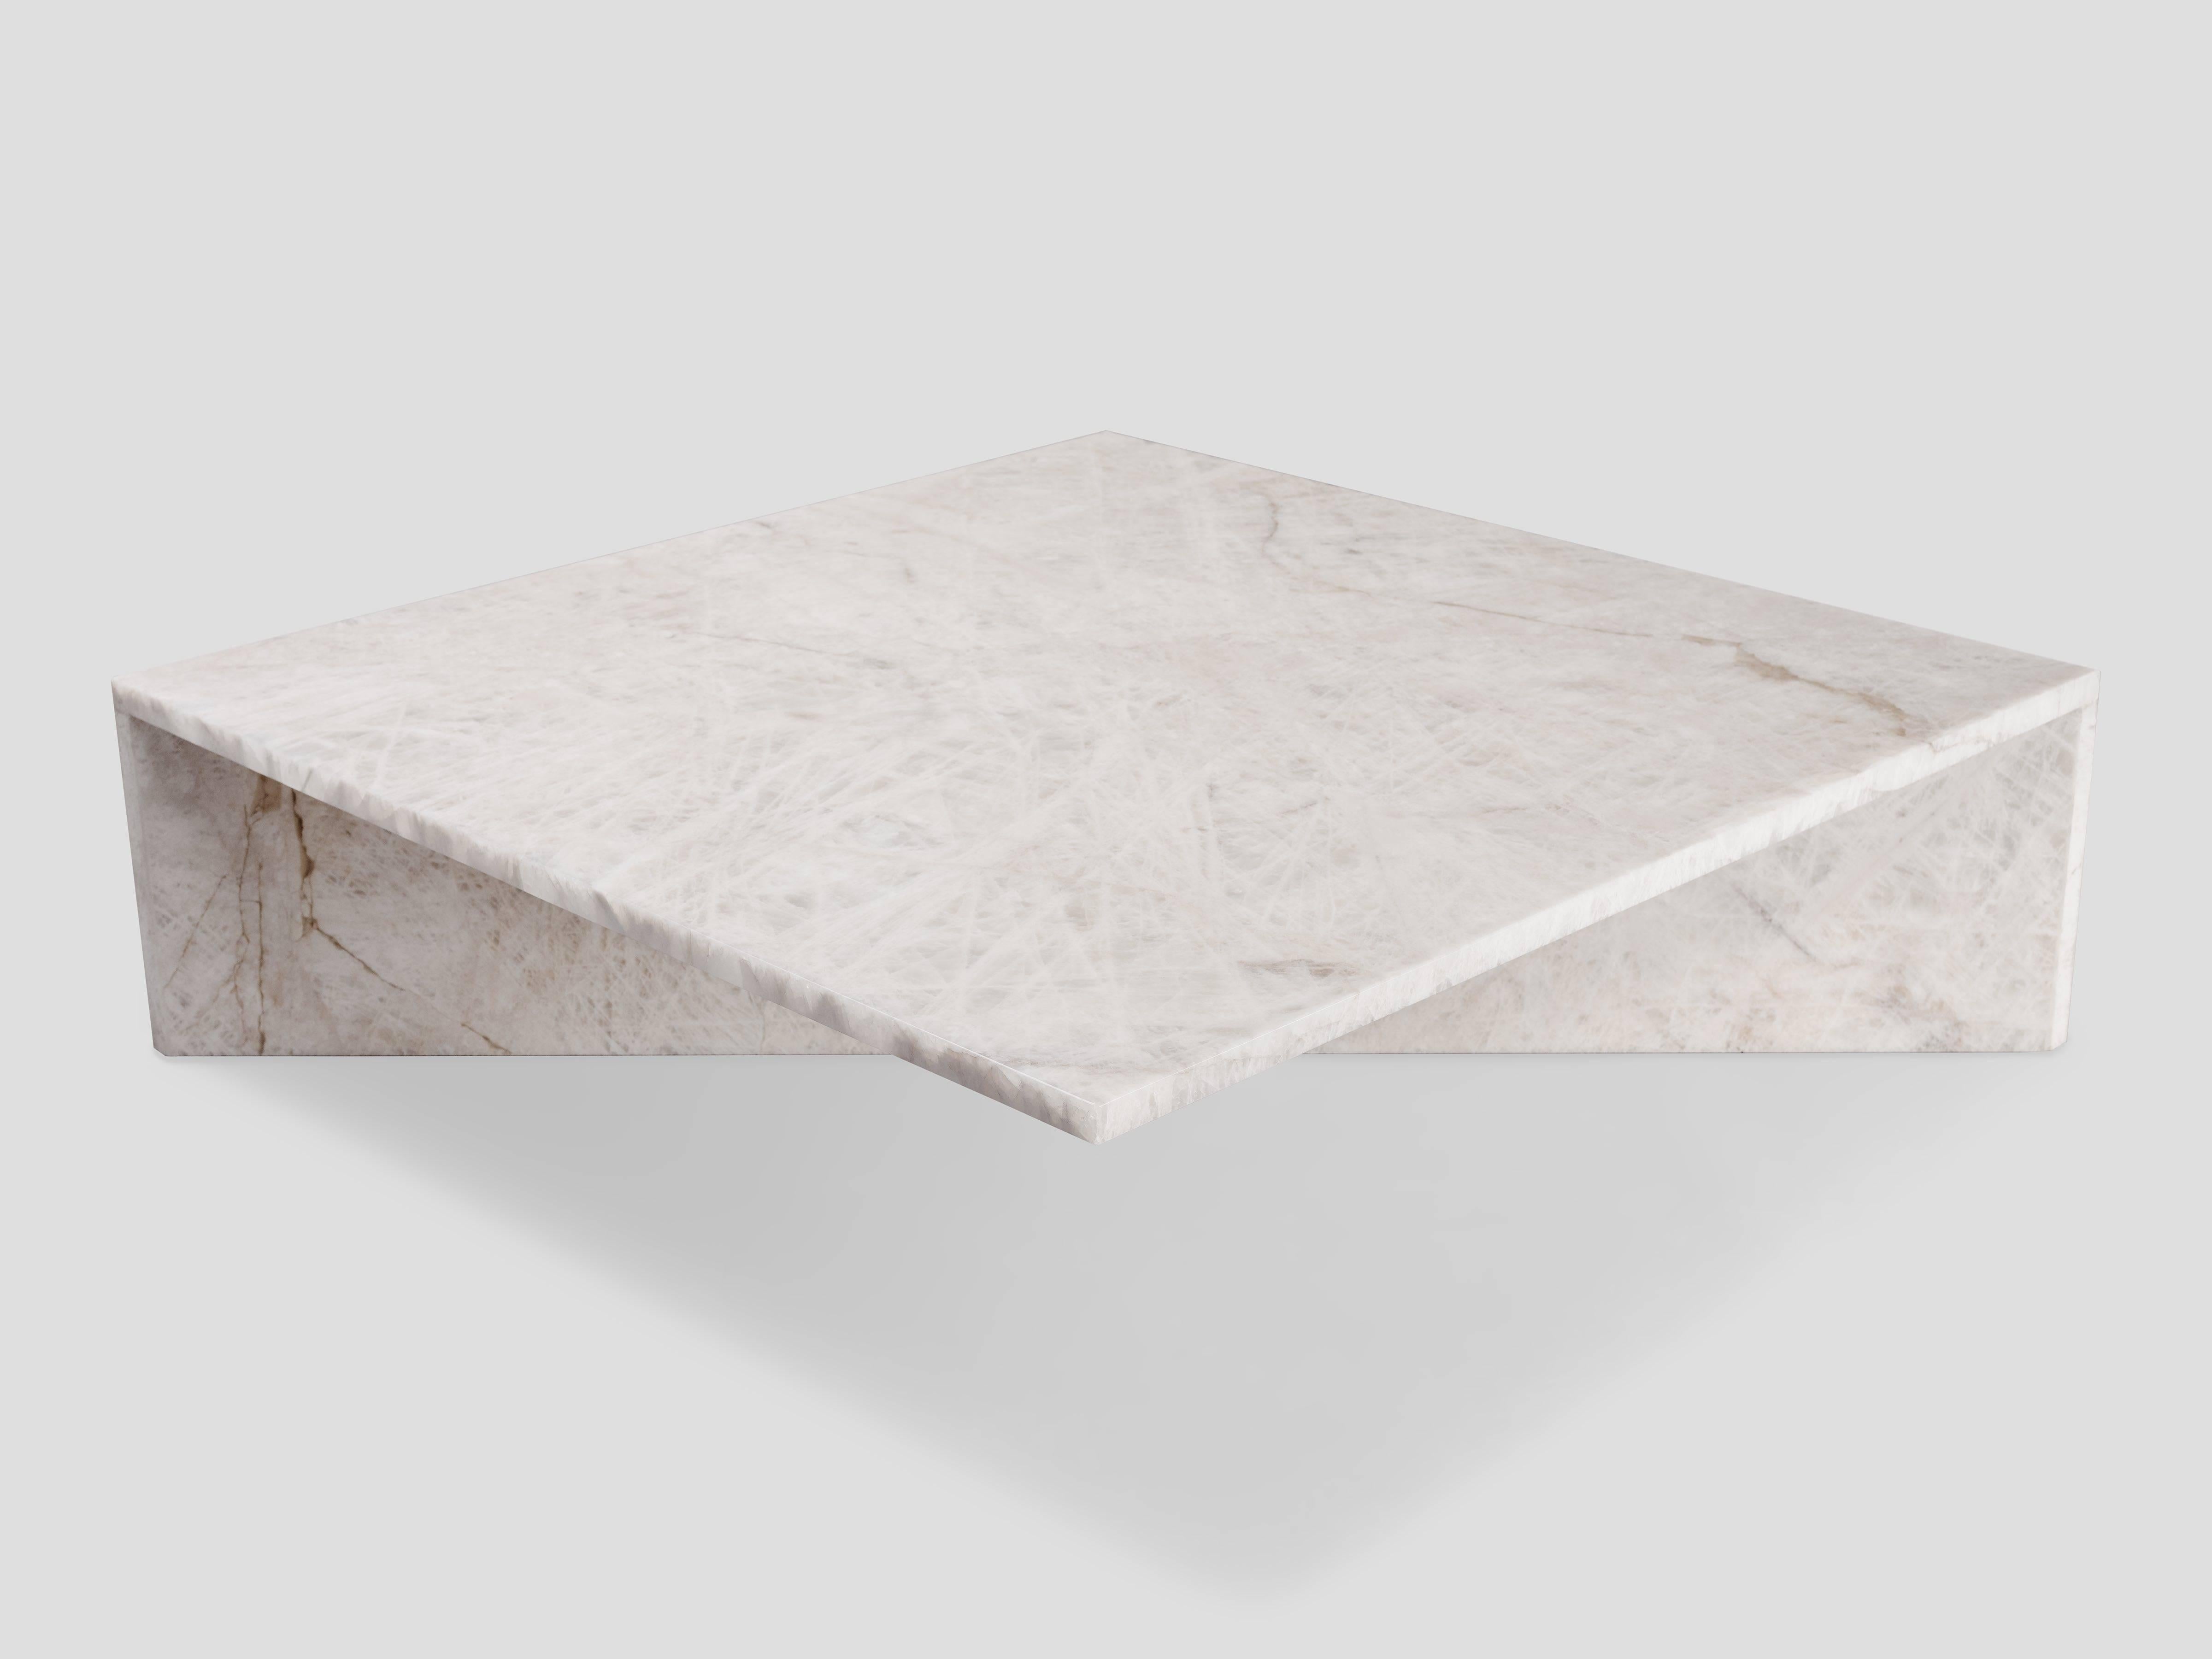 Characterized by its material and form, this coffee table is made of cantilevered Bianco Quartzite; it is one of seven works from the Tension Collection. Claste drew inspiration from the juxtaposition of stability and fragility to create this series